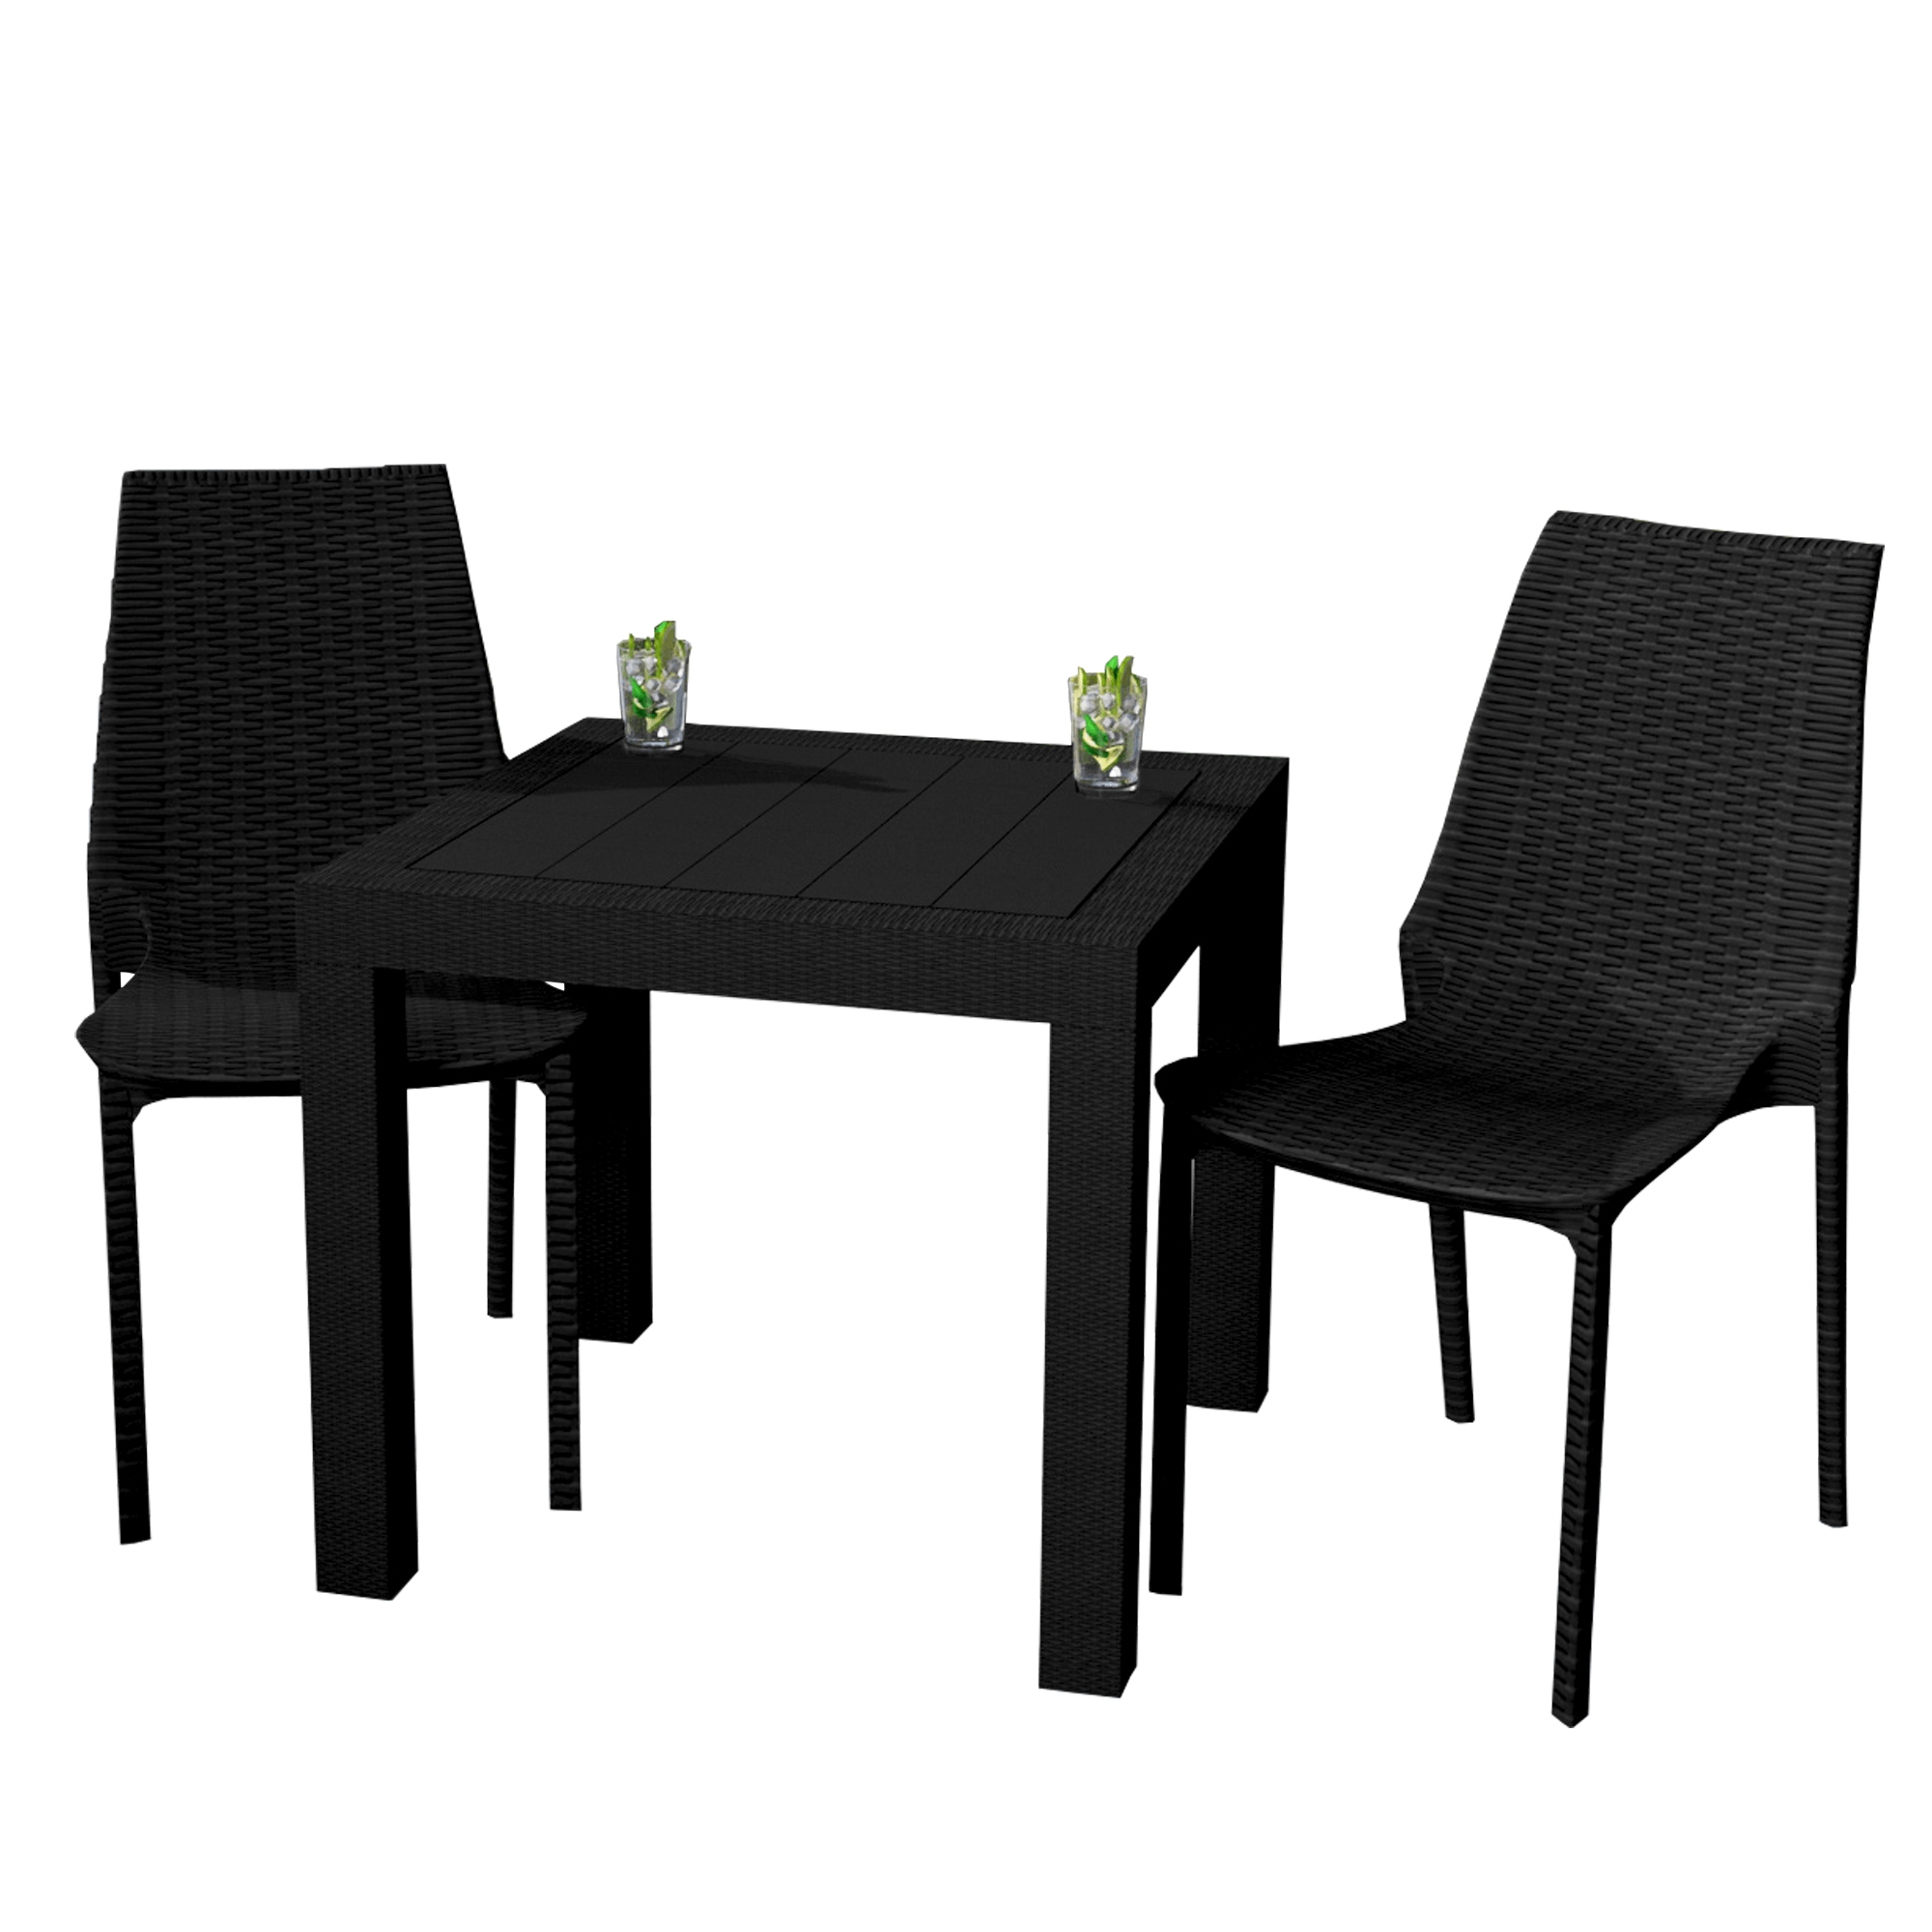 LeisureMod Kent Mid-Century Modern Weave Design 2-Piece Outdoor Patio Dining Set with Plastic Square Table and 2 Stackable Chairs for Patio, Poolside, and Backyard Garden (Black) - image 1 of 18